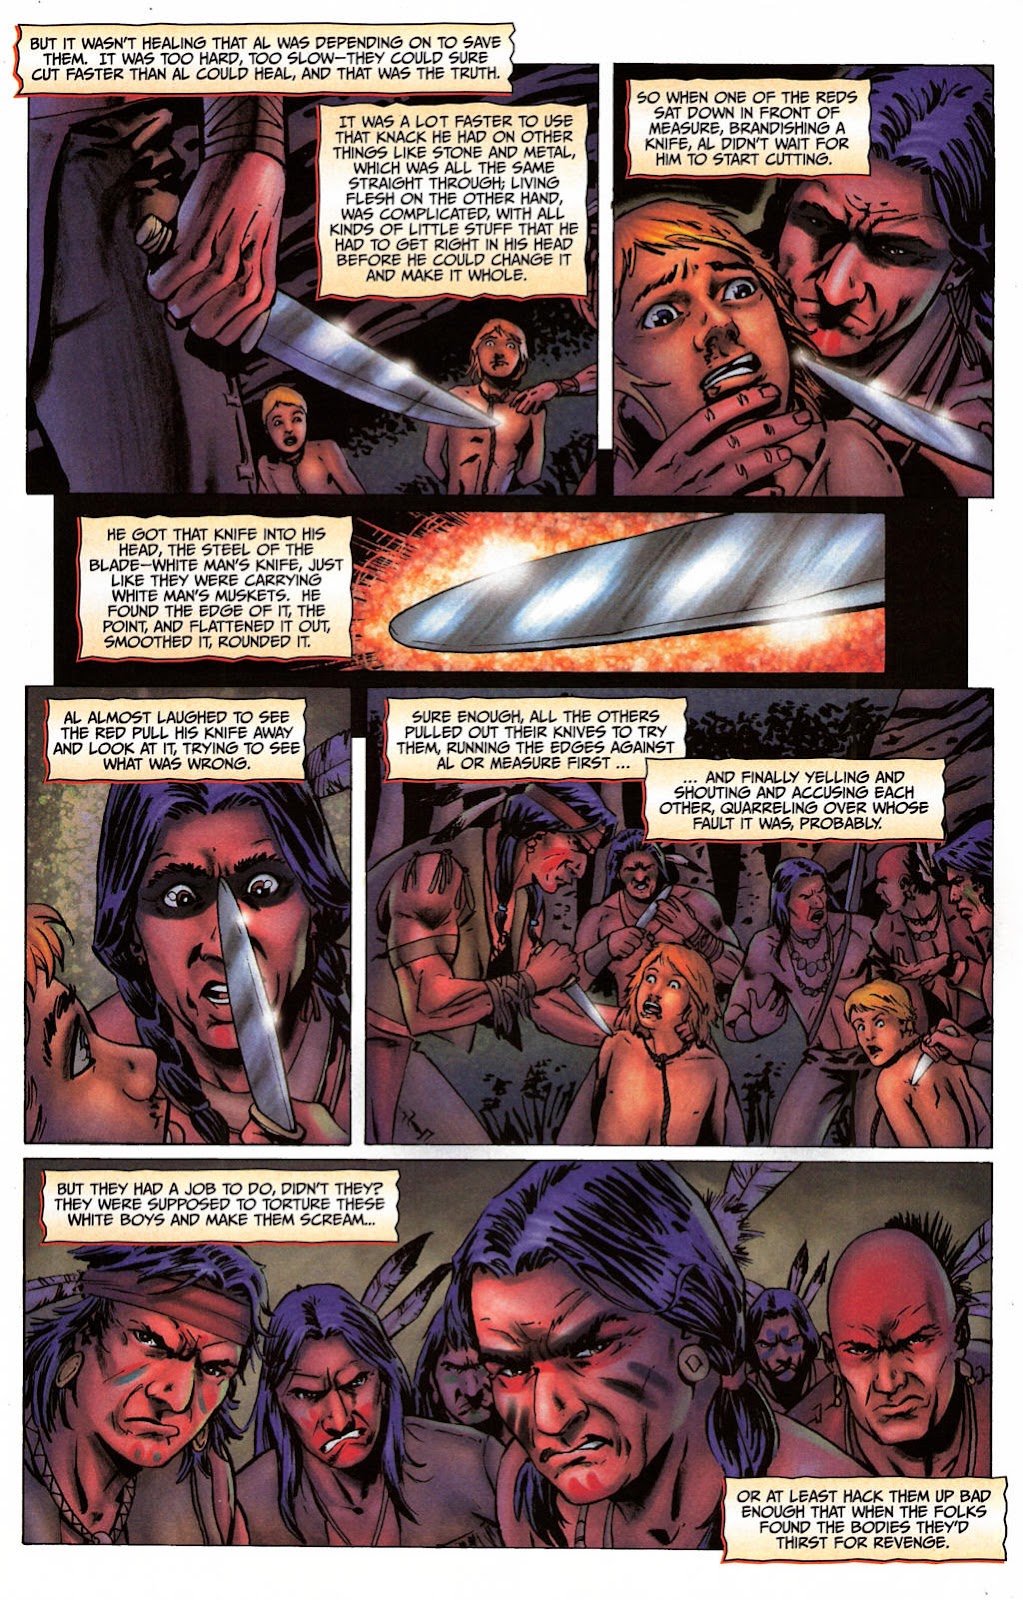 Red Prophet: The Tales of Alvin Maker issue 5 - Page 11